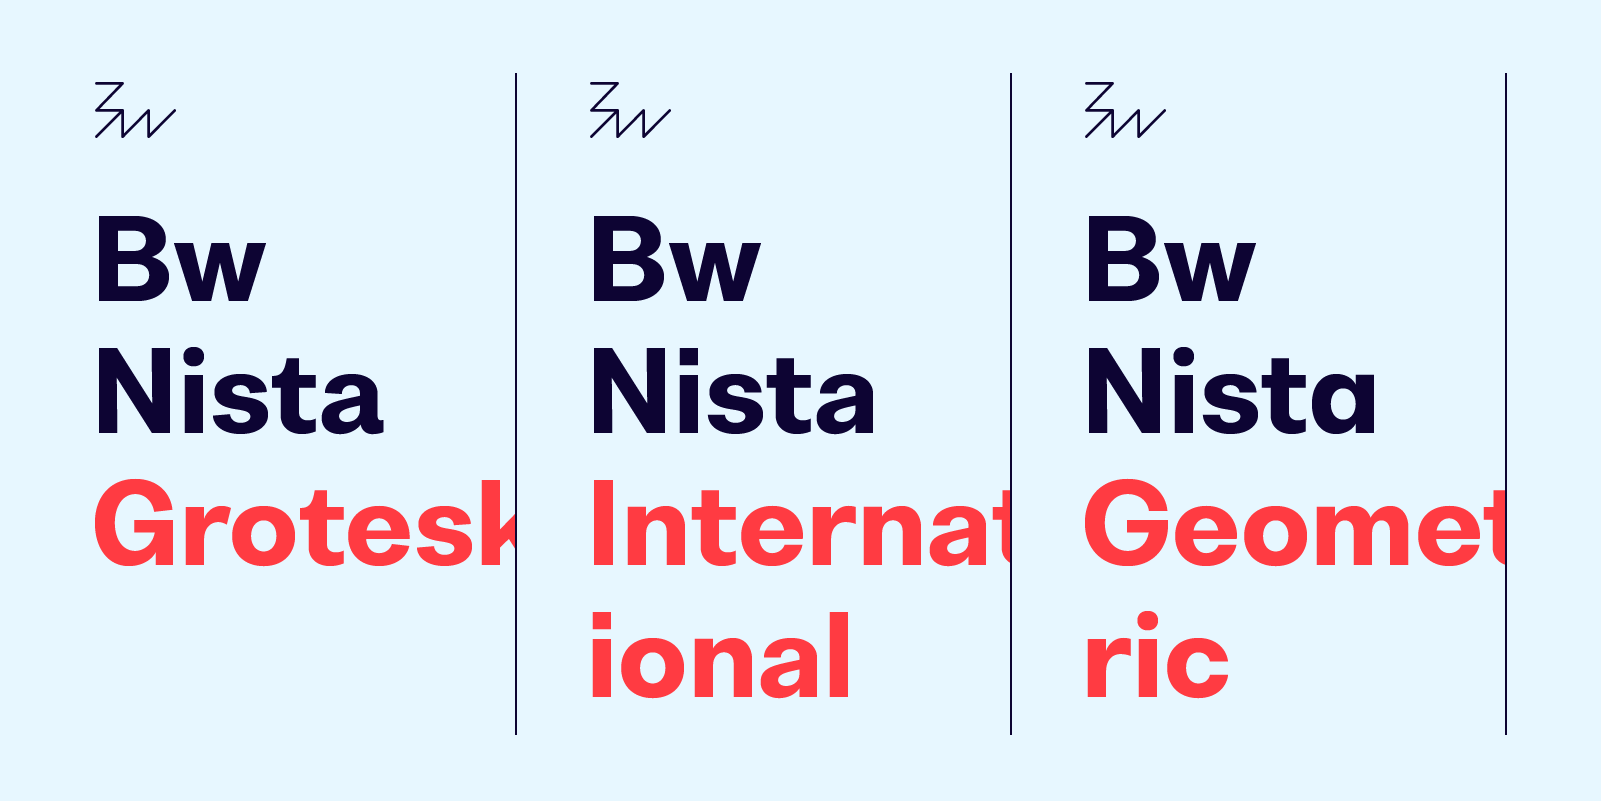 Bw Nista font family. A grotesque release